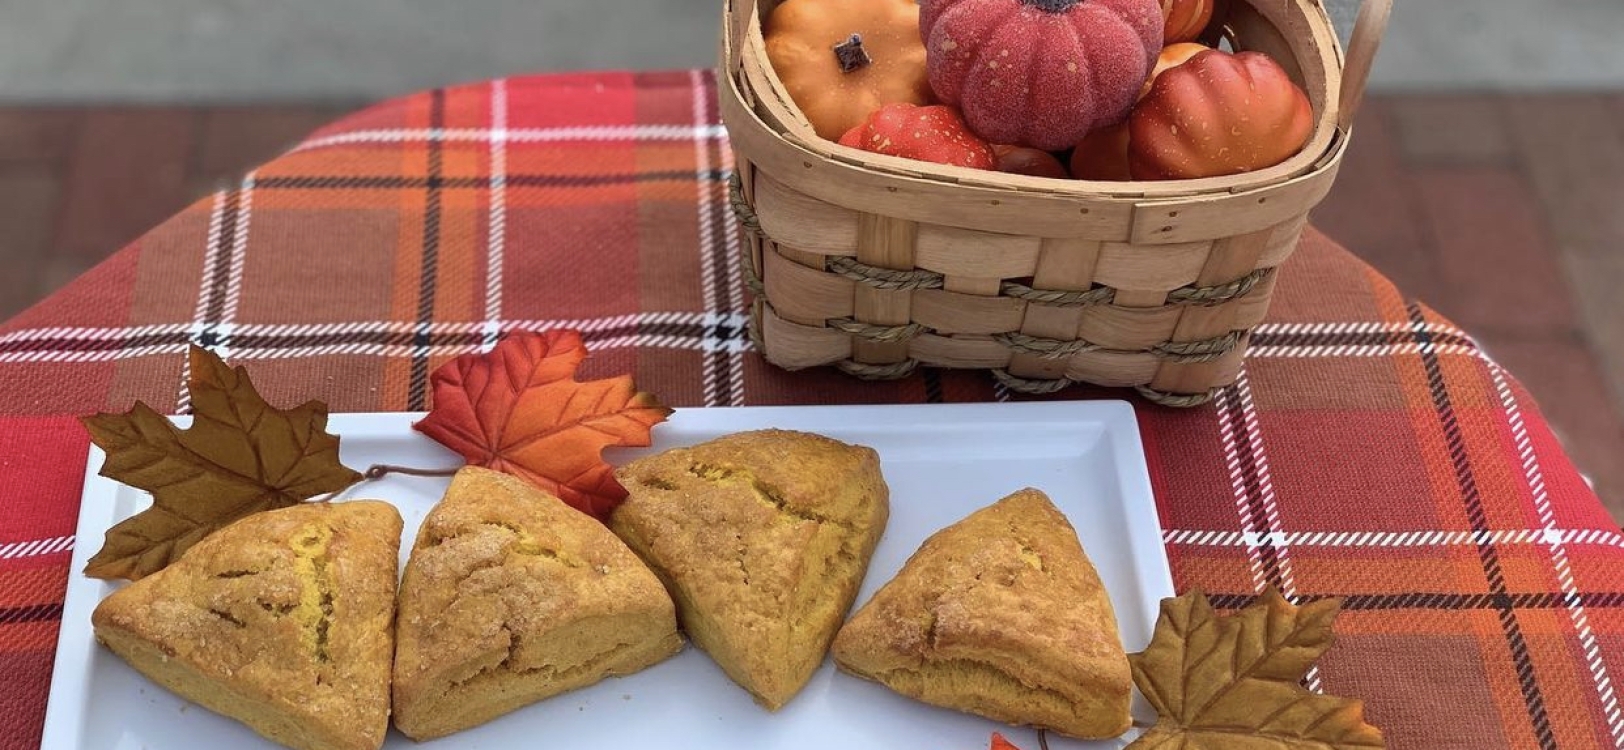 A plaid table stylized with leaves and small pumpkins with a plate of scones.